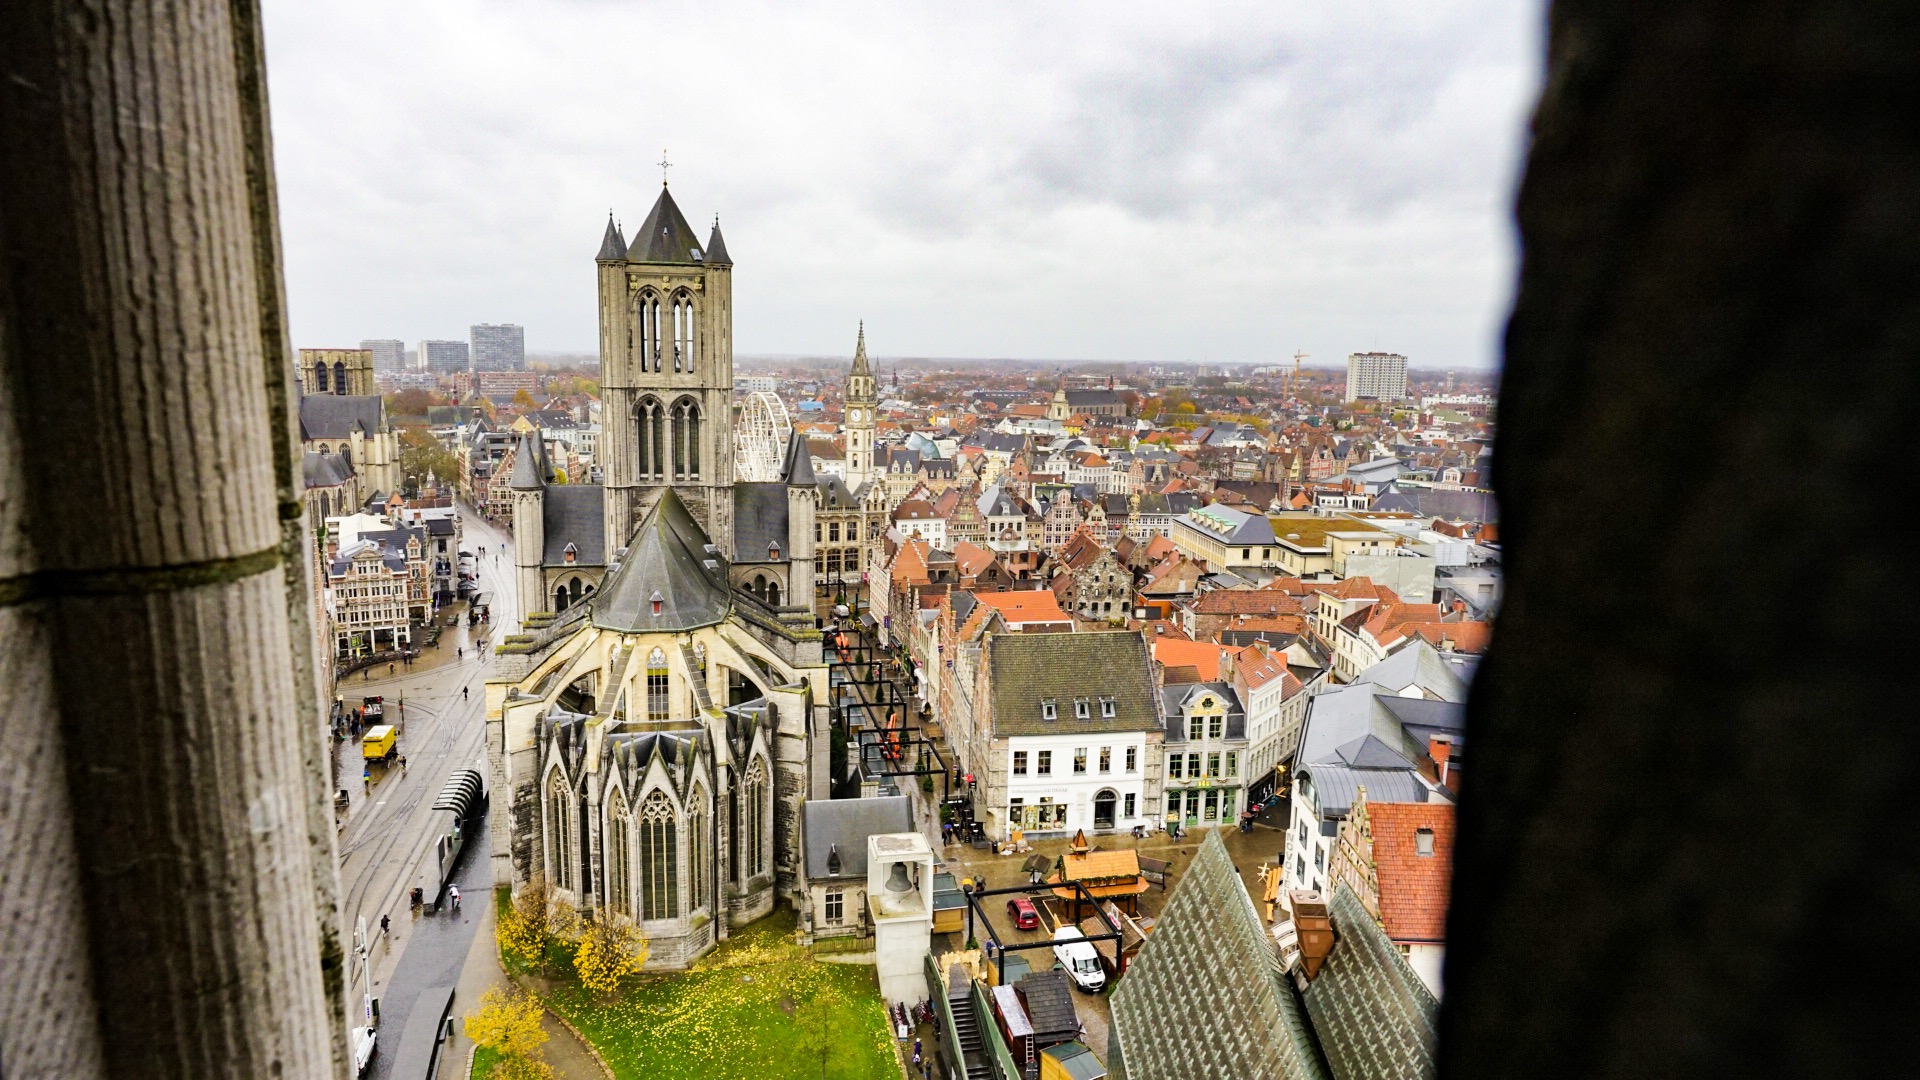 Ghent, from the top...